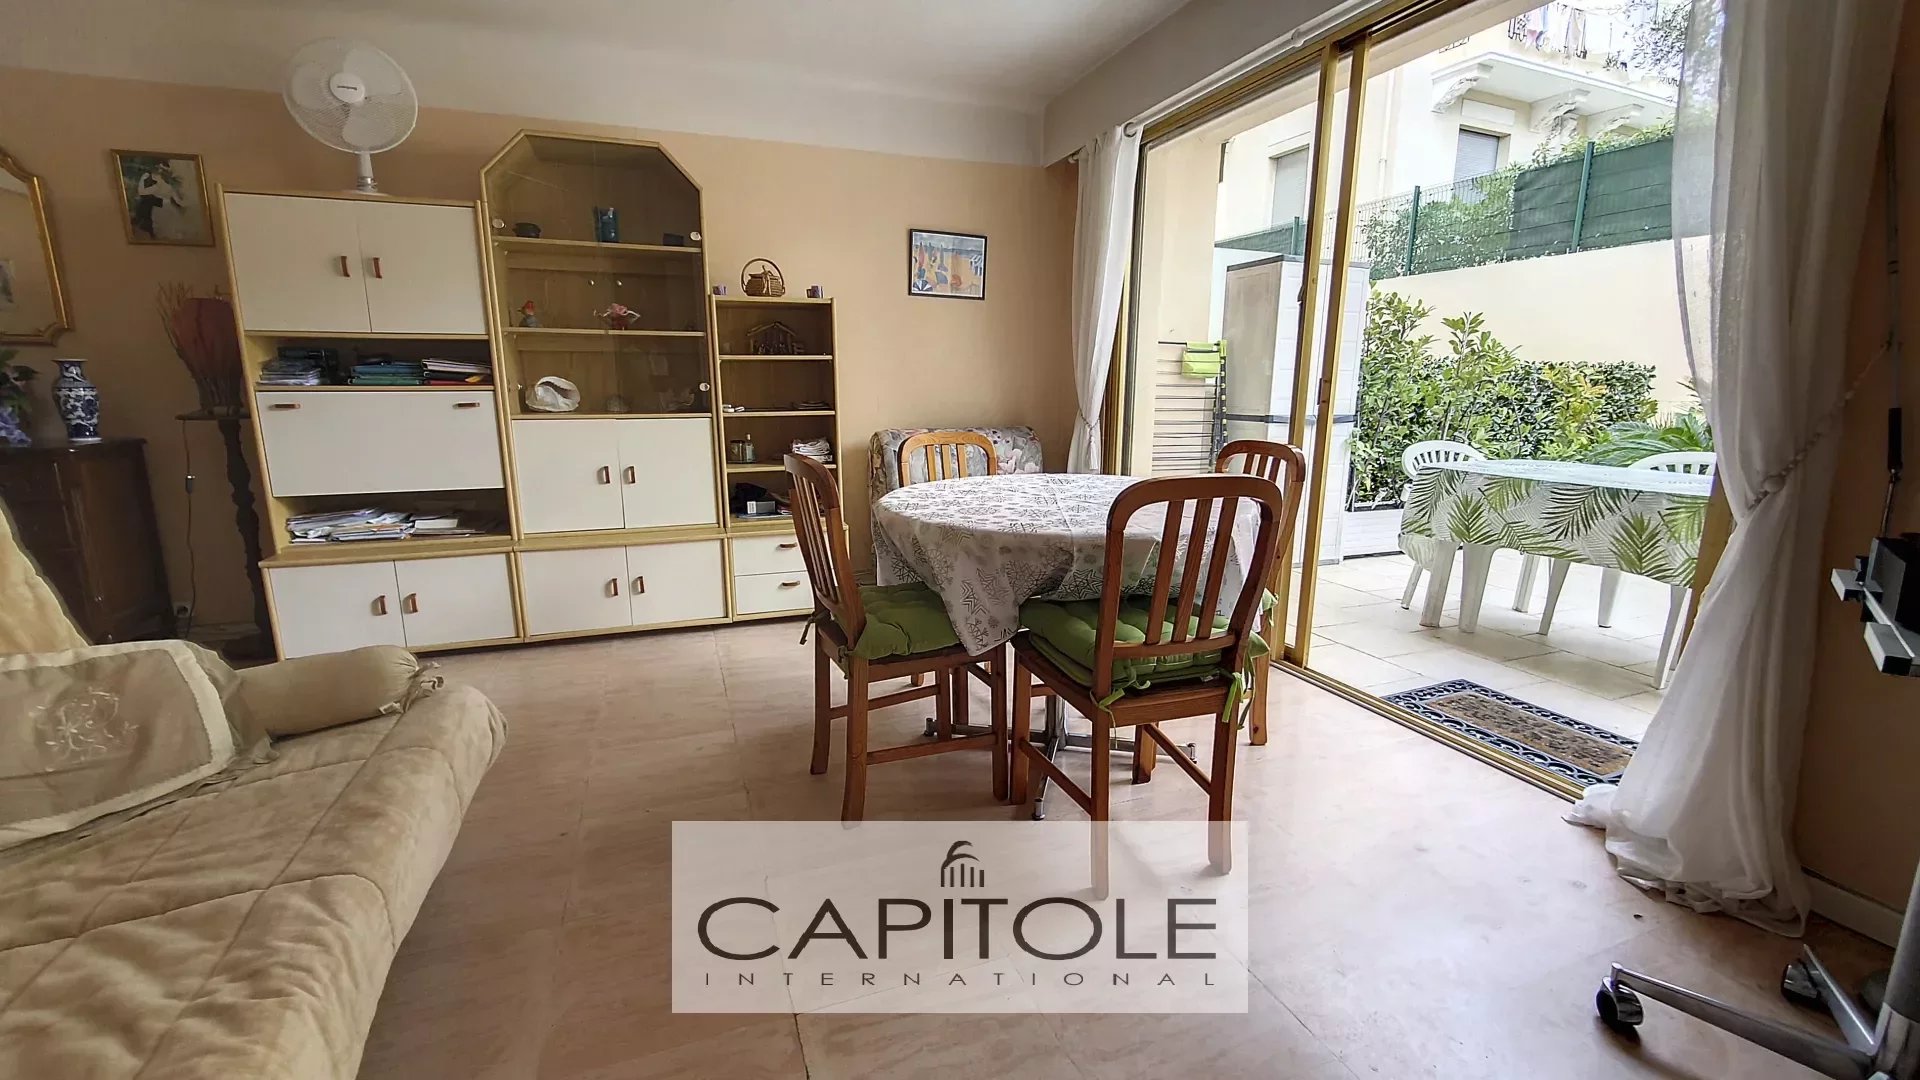 Cannes - Studio, 15 min from the sandy beaches and the train station